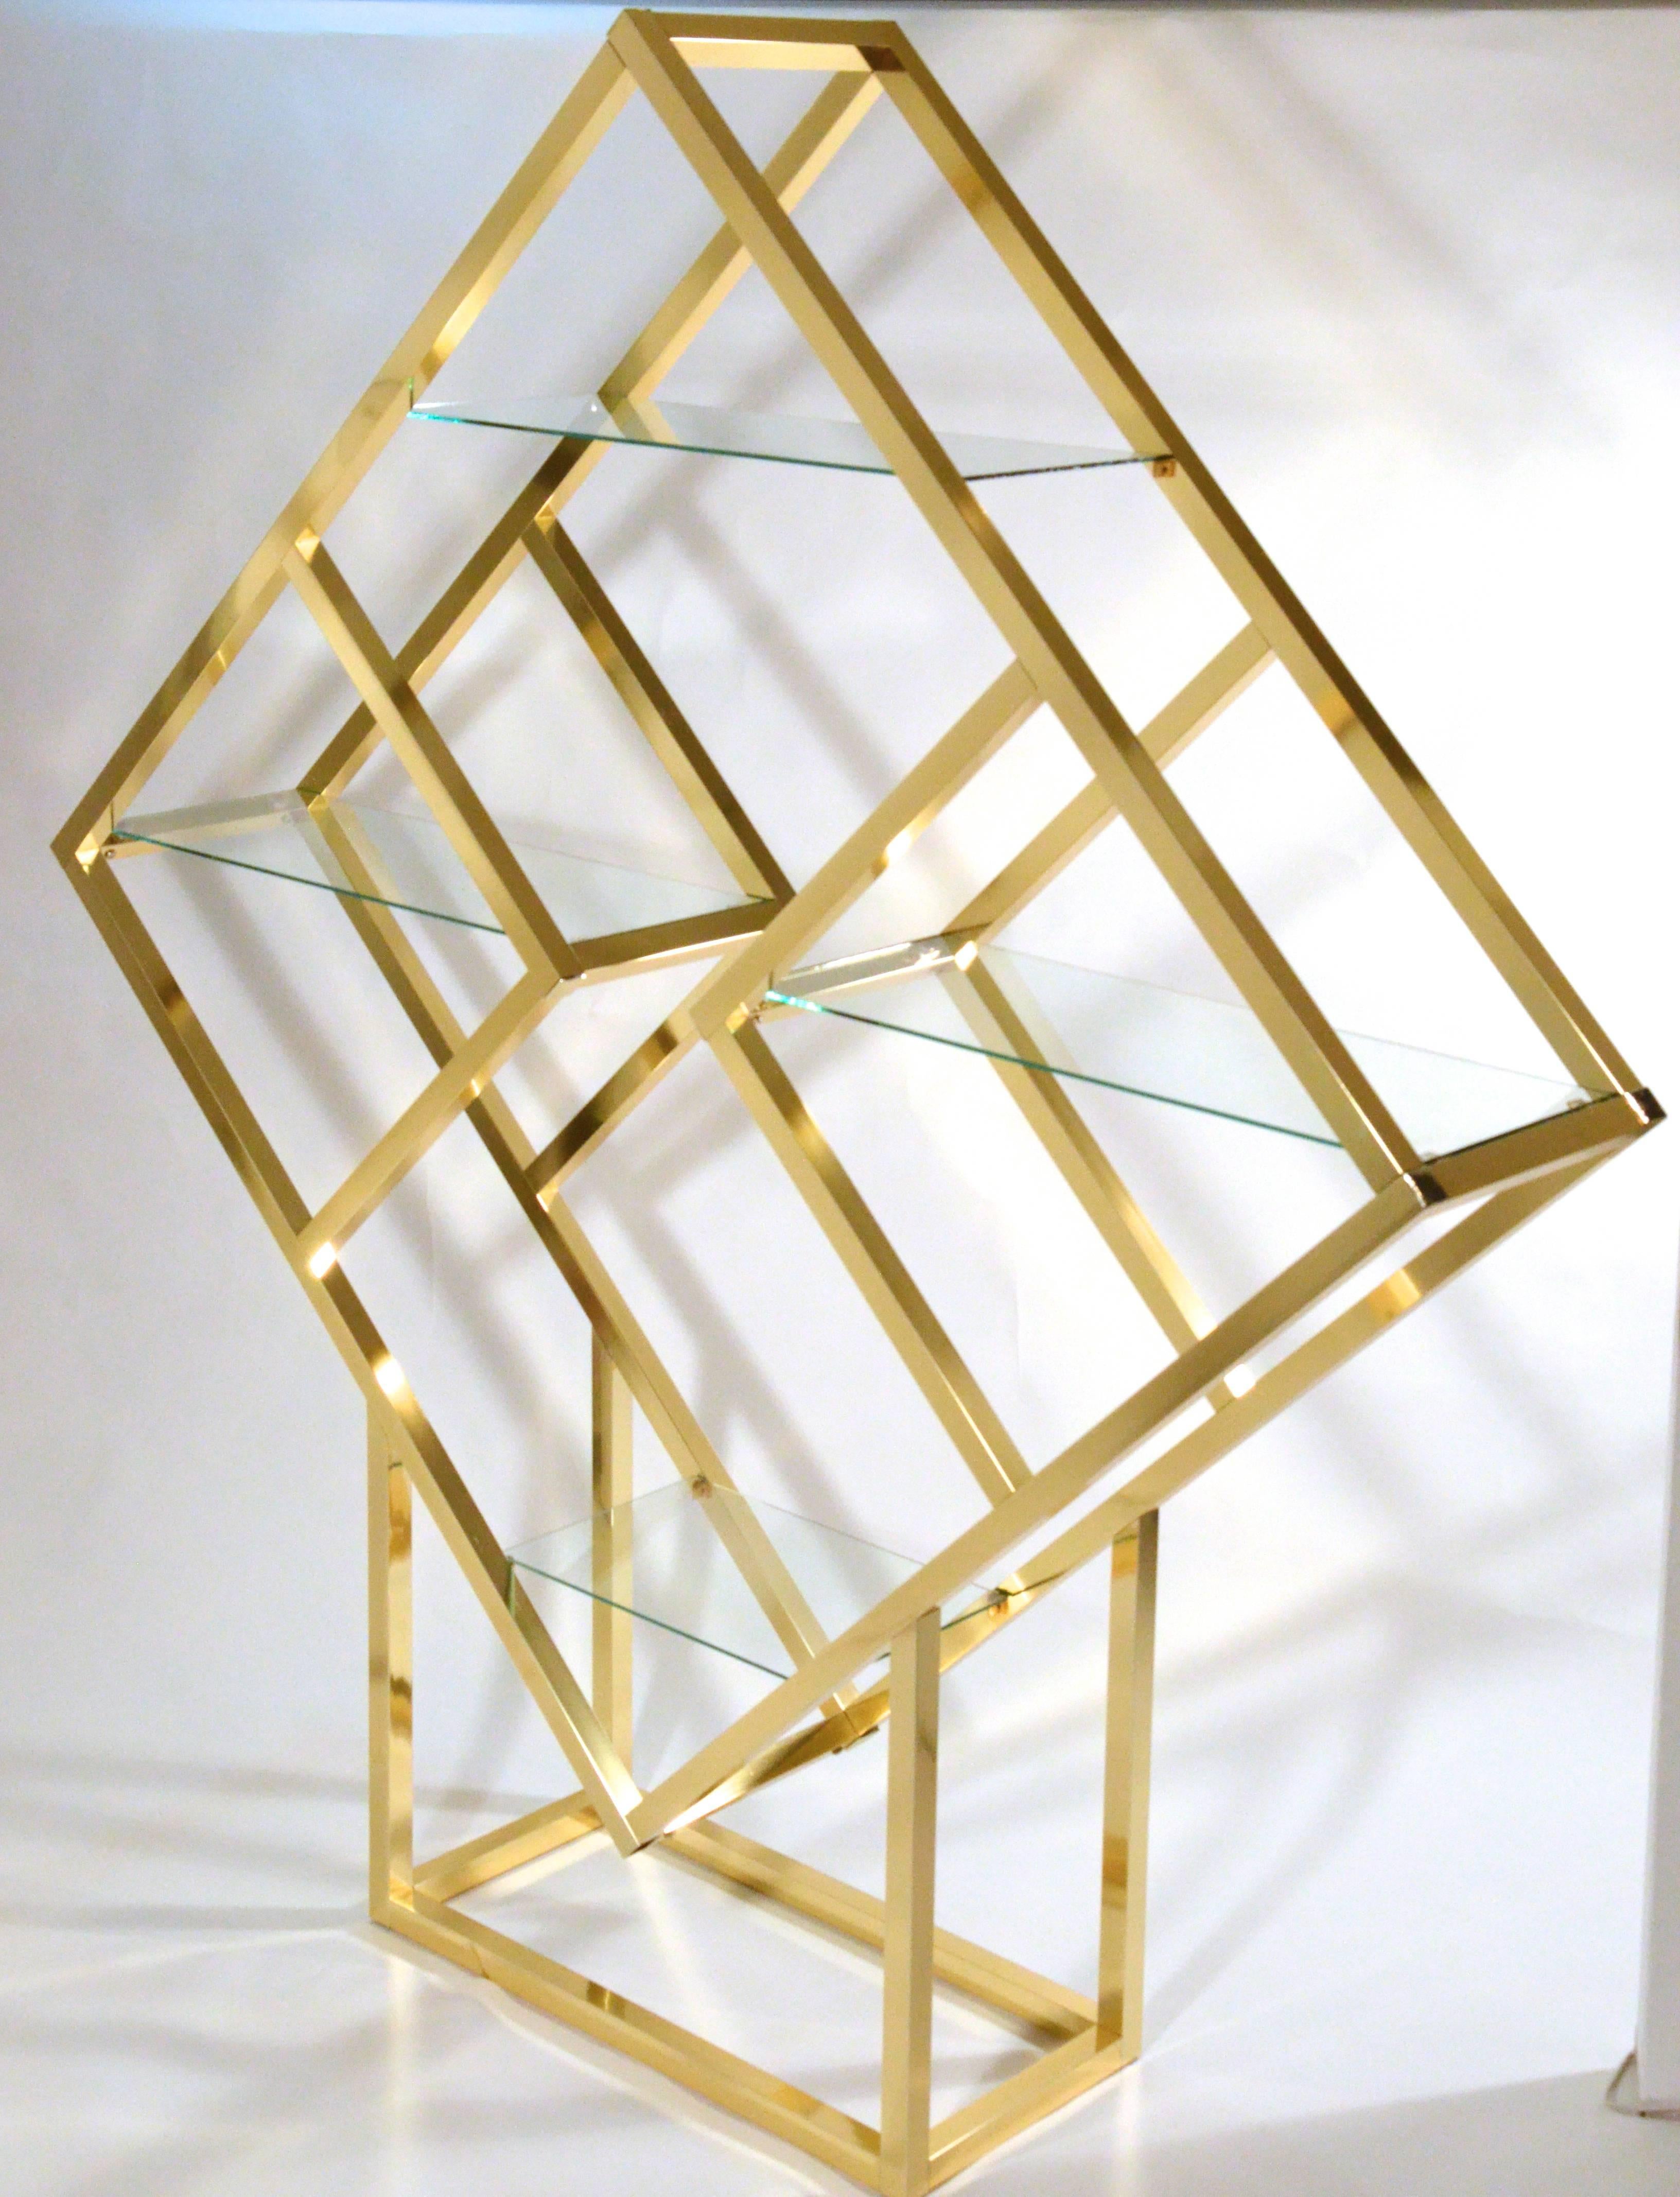 Diamonds are a girl's and guy's best friend! On offer is a stunning brass anodized aluminum diamond shaped étagère with four 